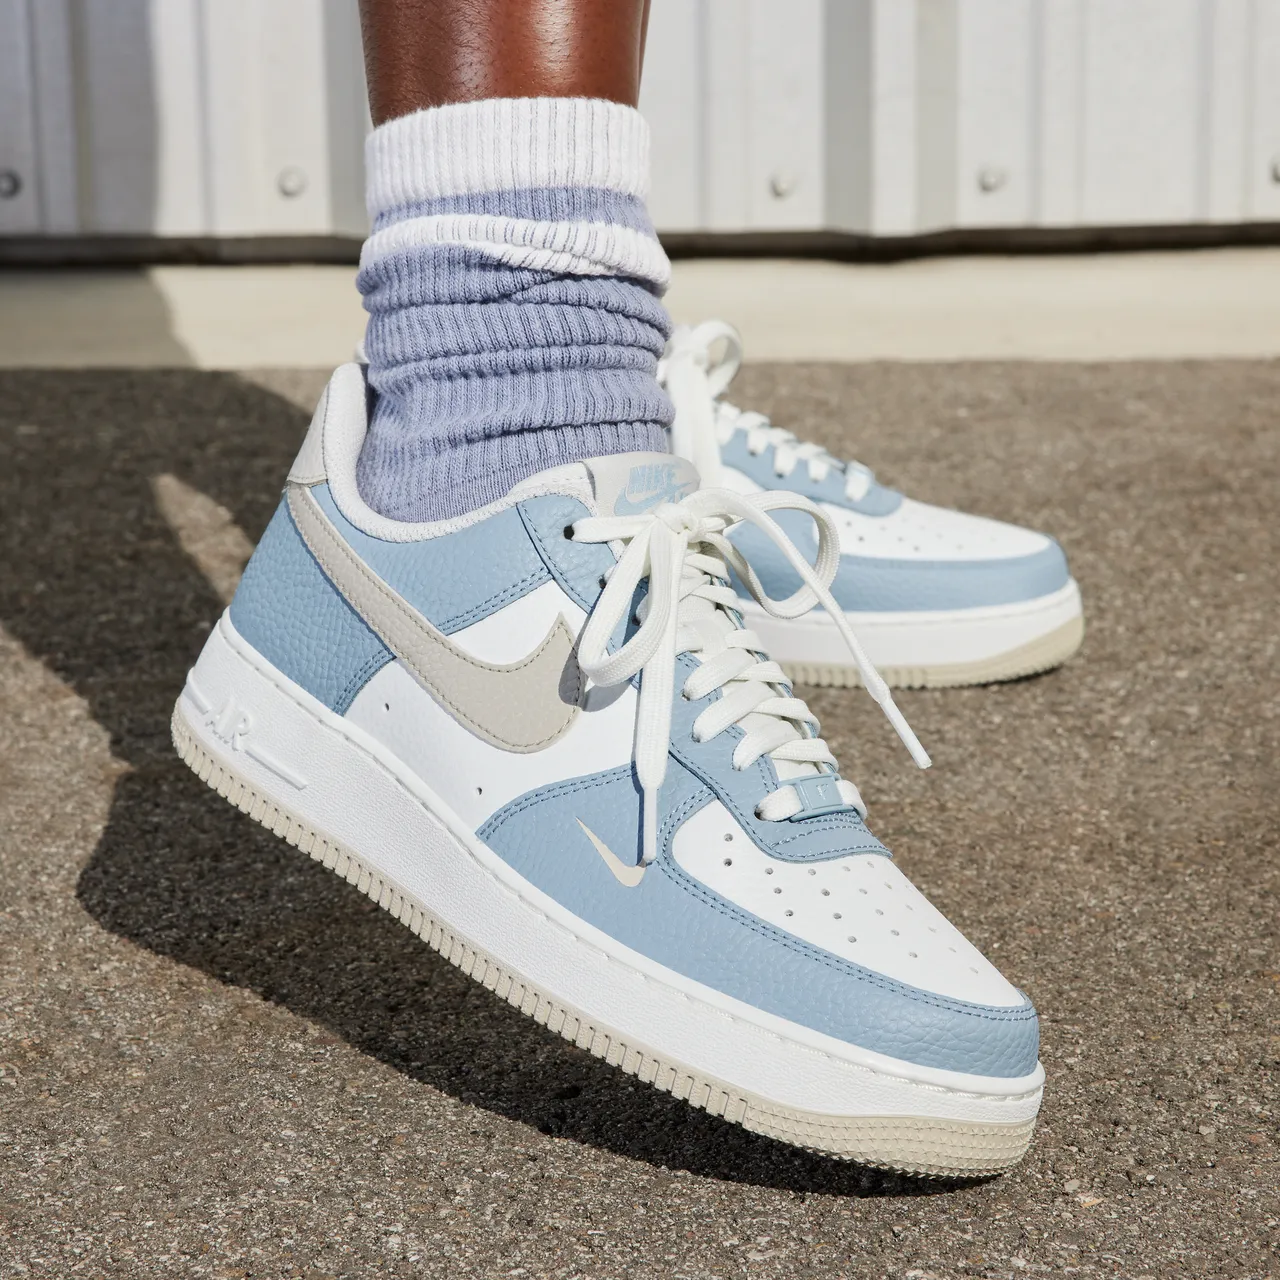 Nike Air Force 1 '07 Women's Shoes - Blue